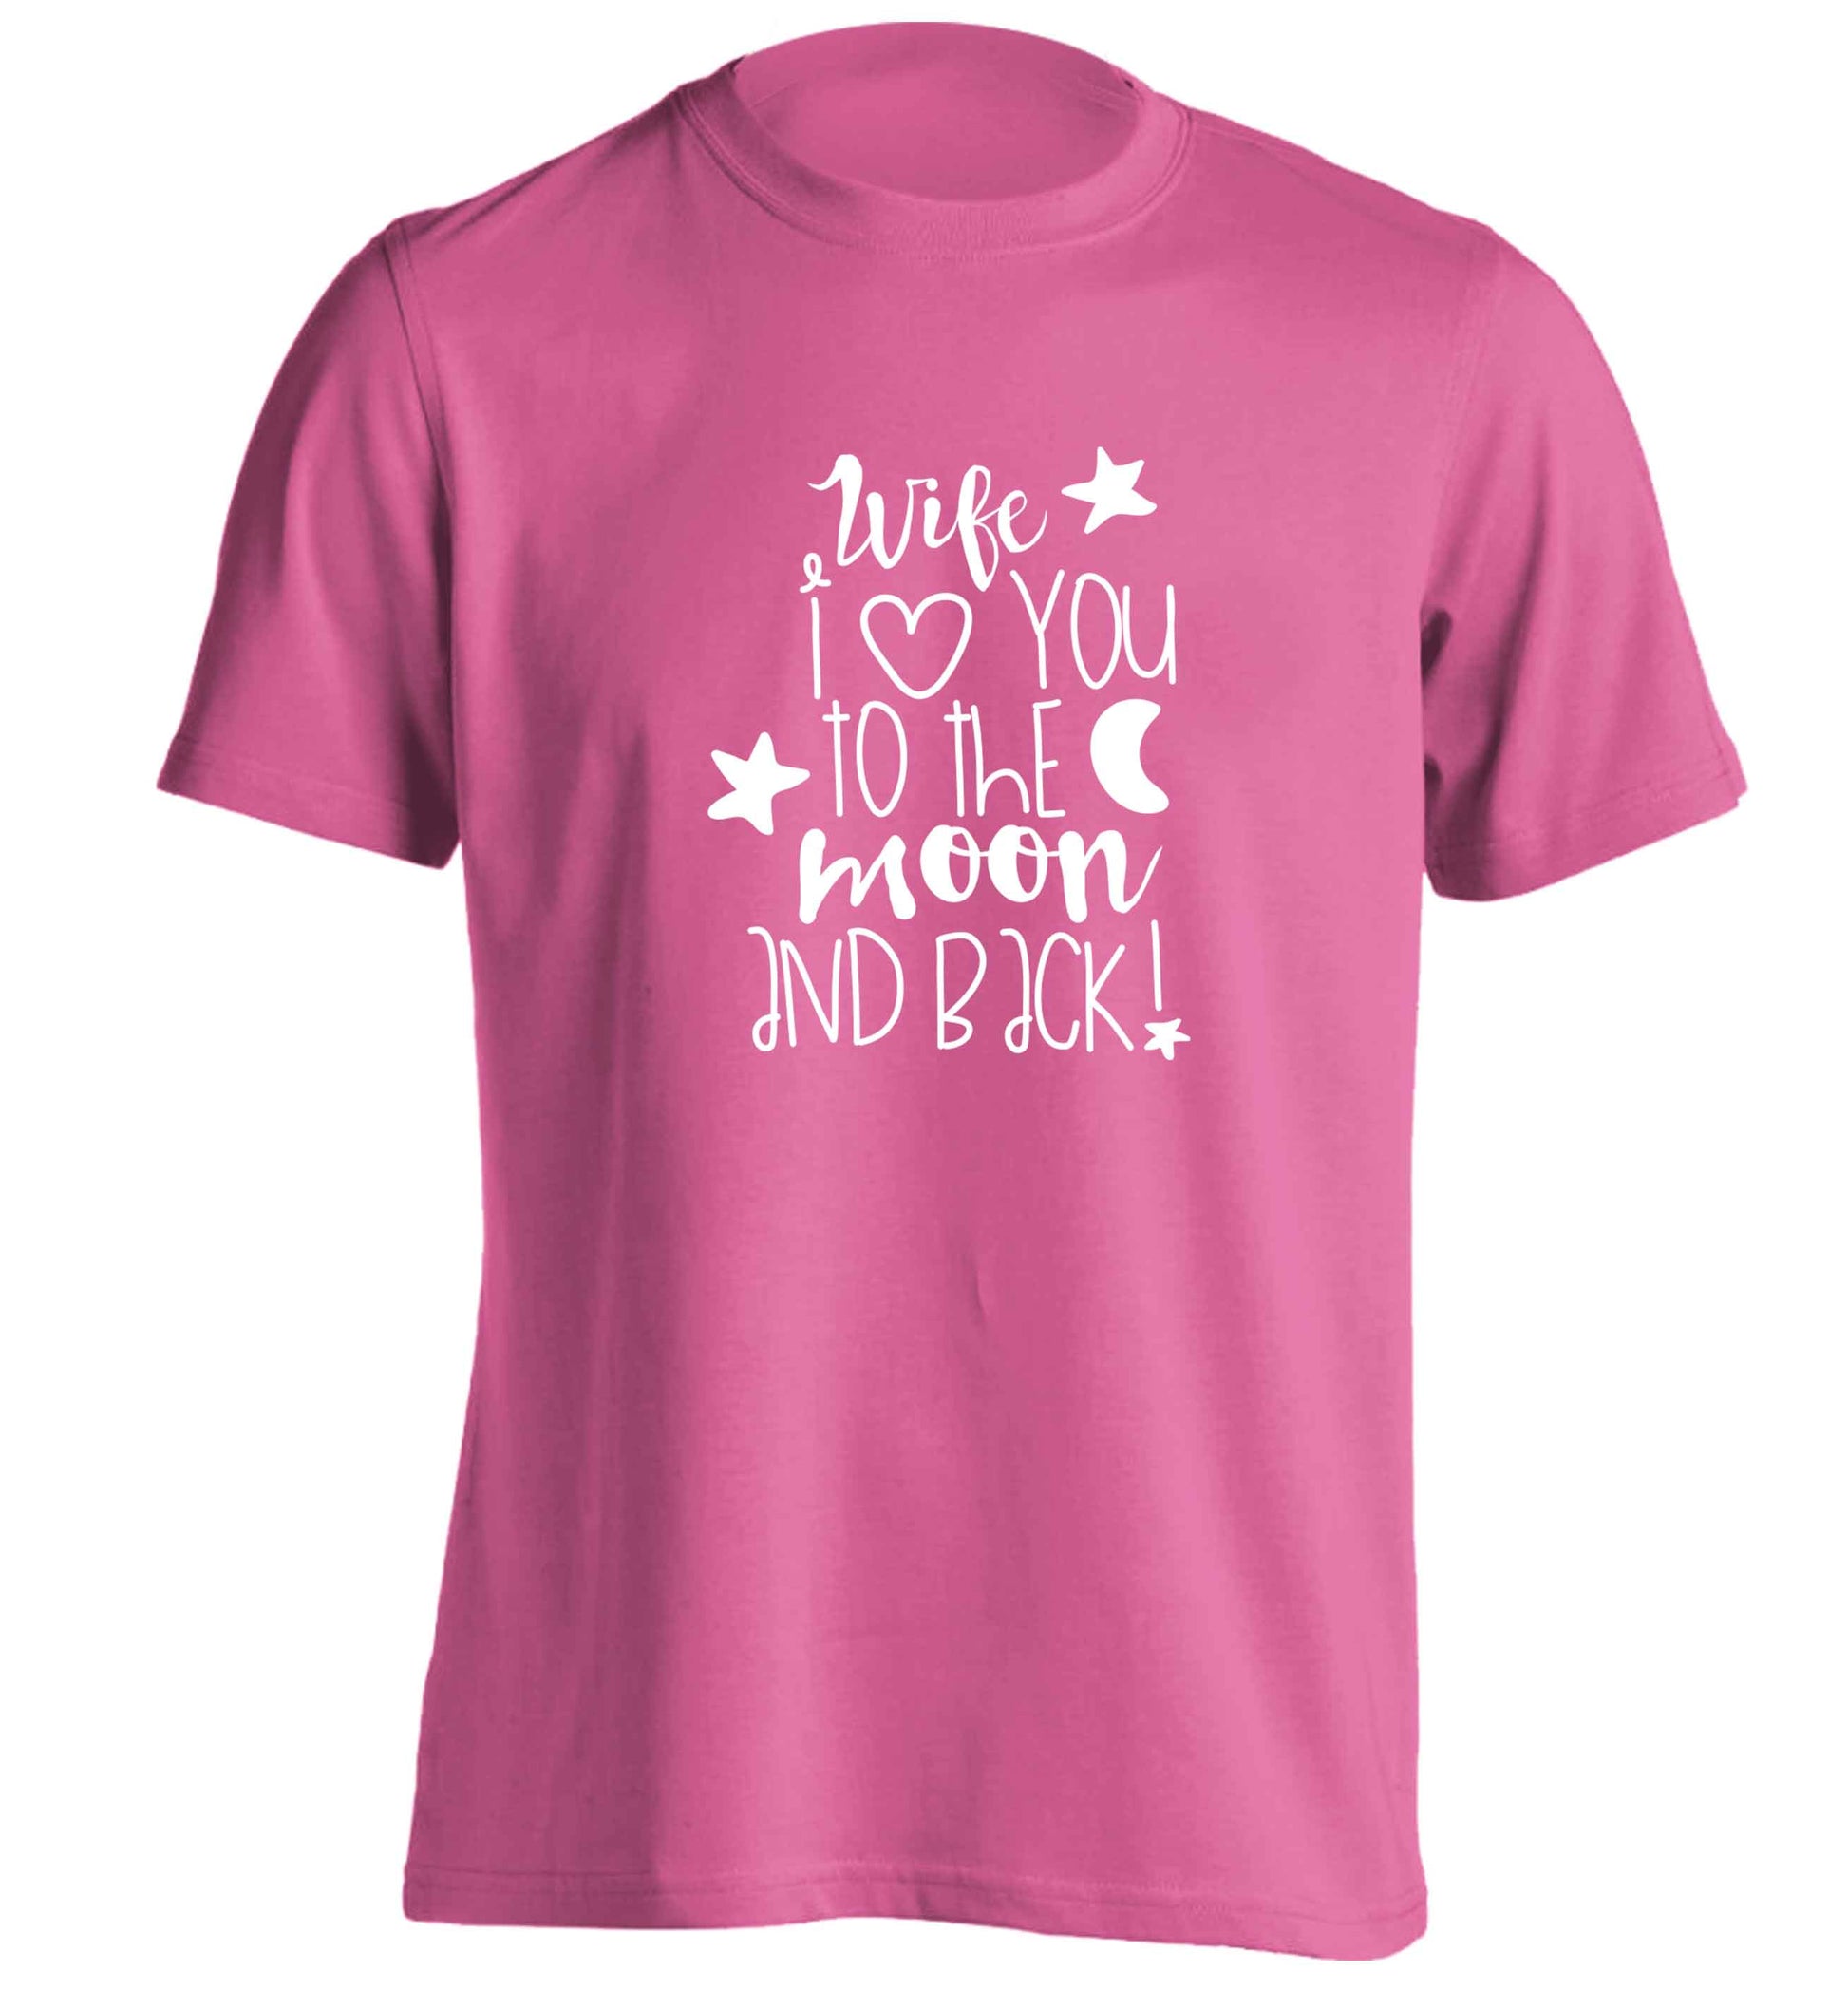 Wife I love you to the moon and back adults unisex pink Tshirt 2XL